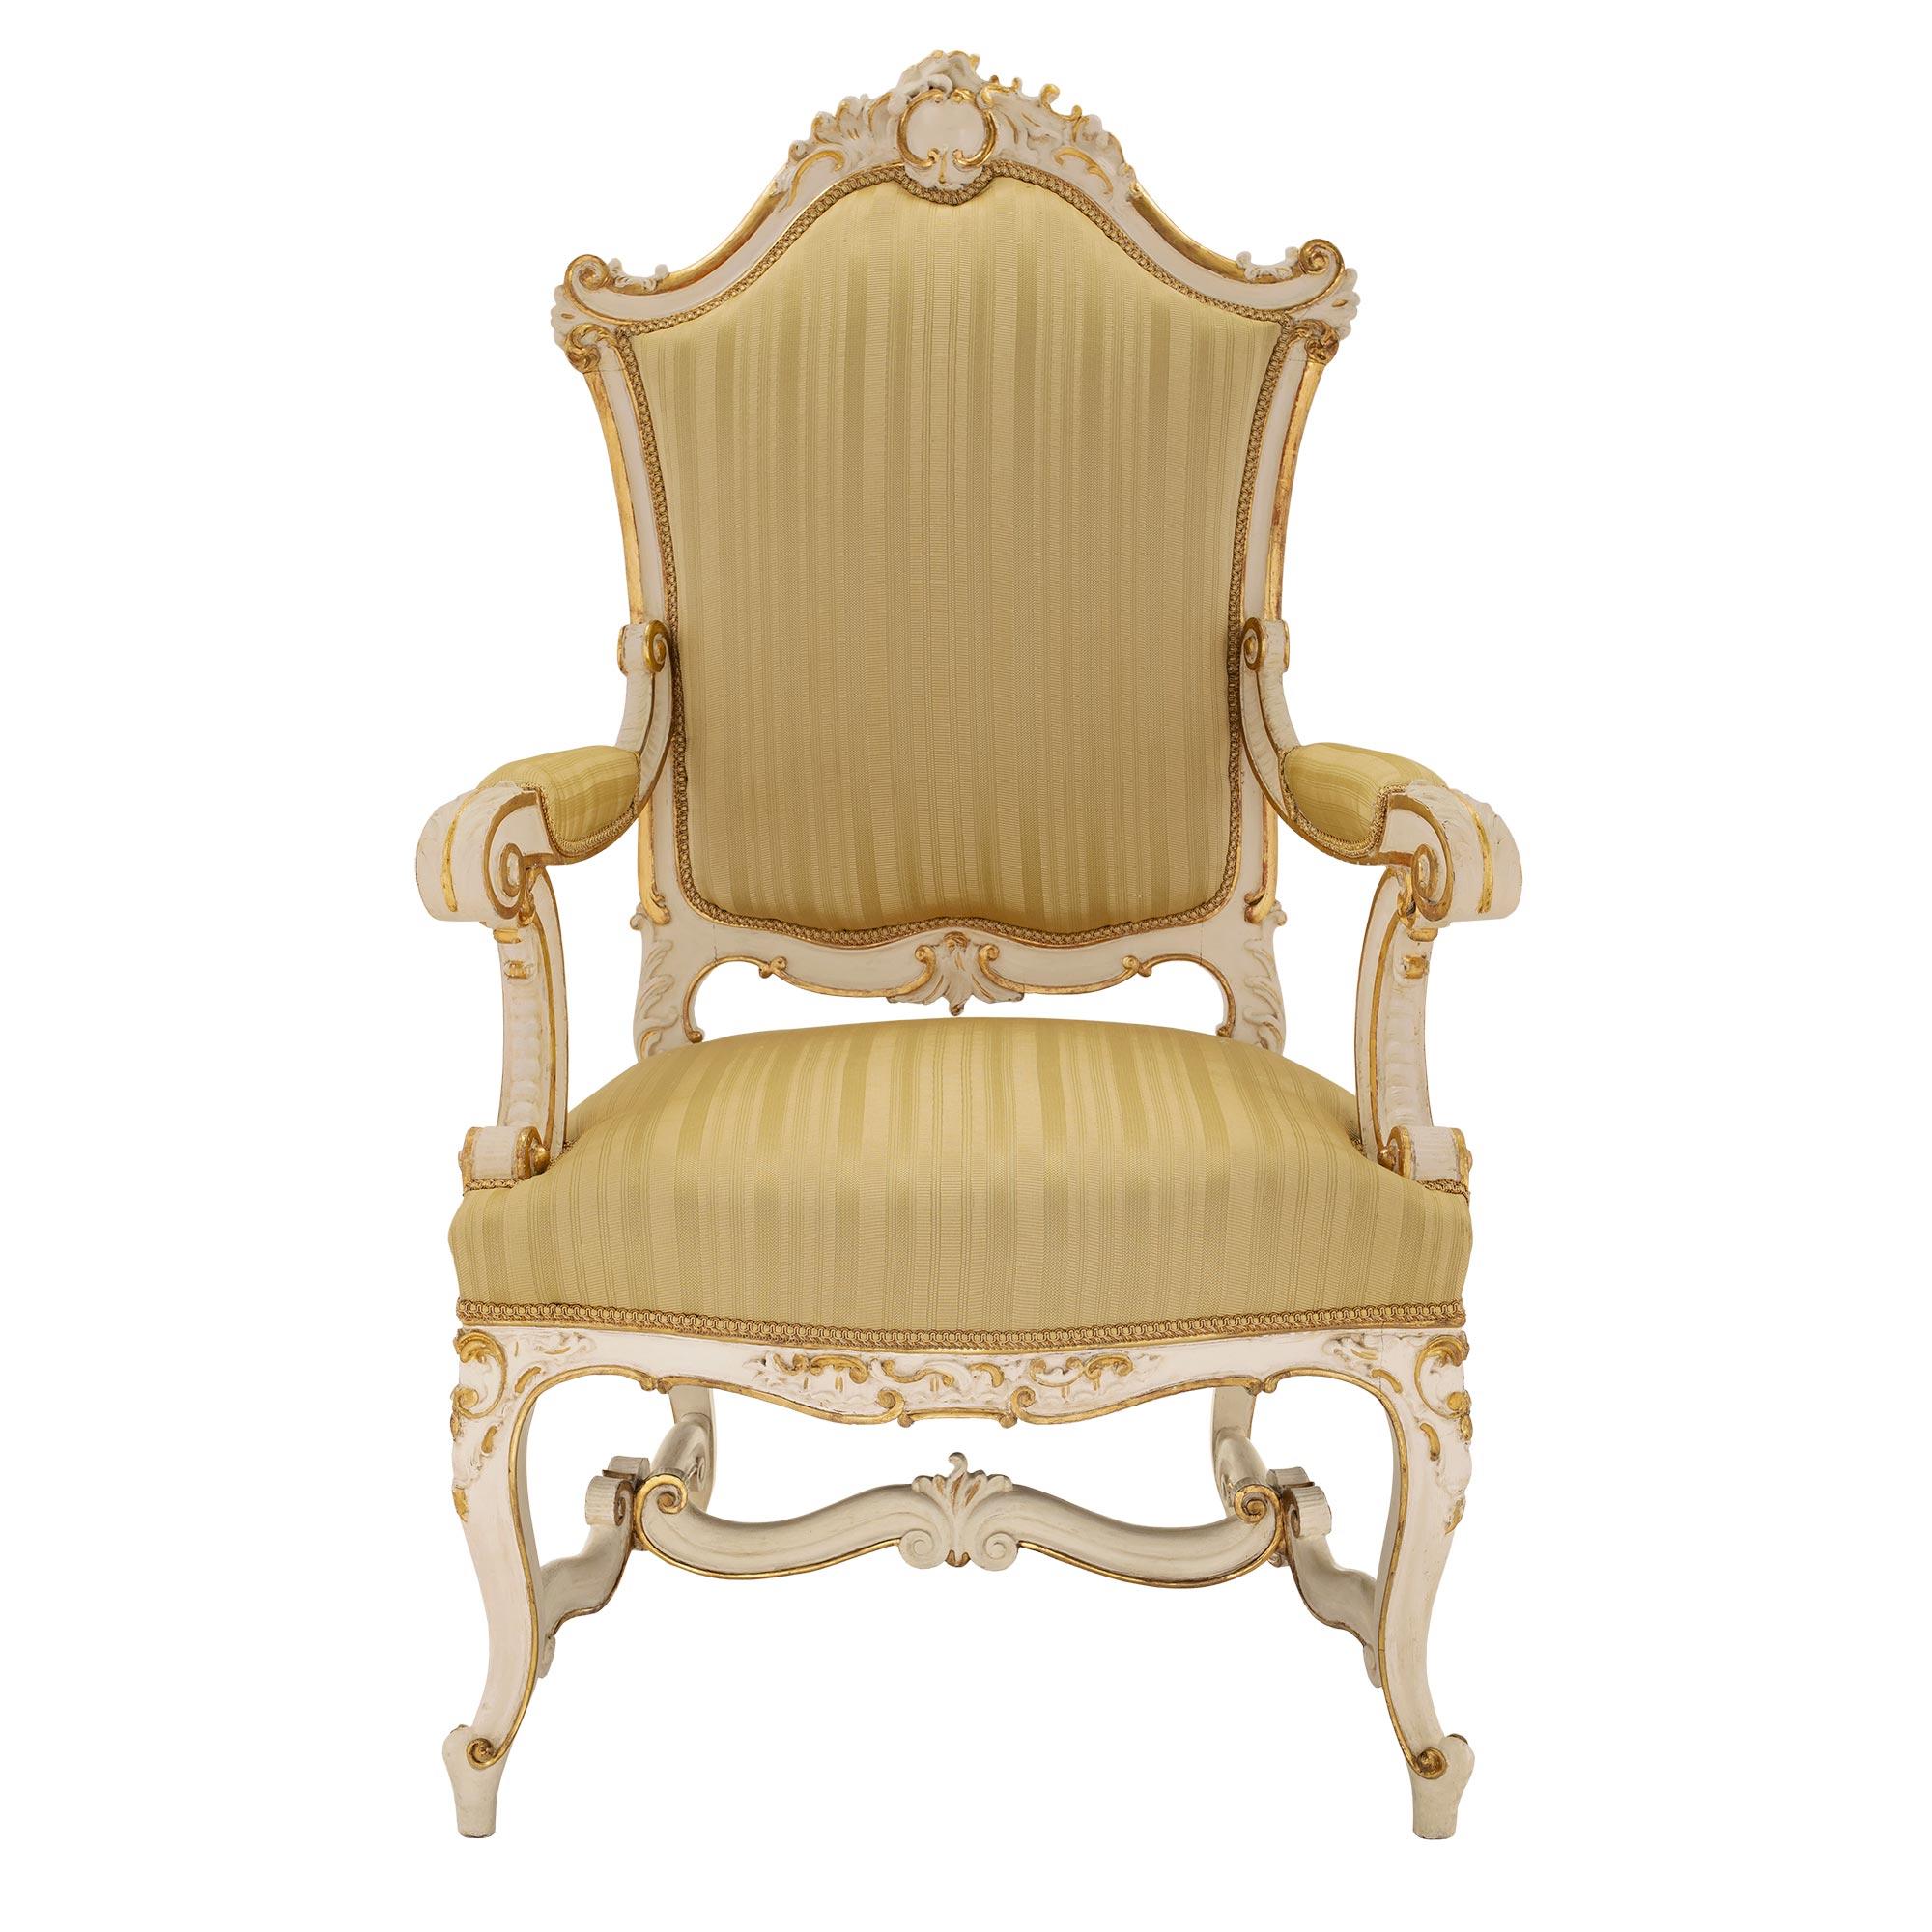 A beautiful and high quality pair of Italian 19th century patinated and giltwood Venetian armchairs. Each armchair is raised by elegant cabriole legs, attached by a scrolled H shaped stretcher with wonderfully decorative movements and giltwood